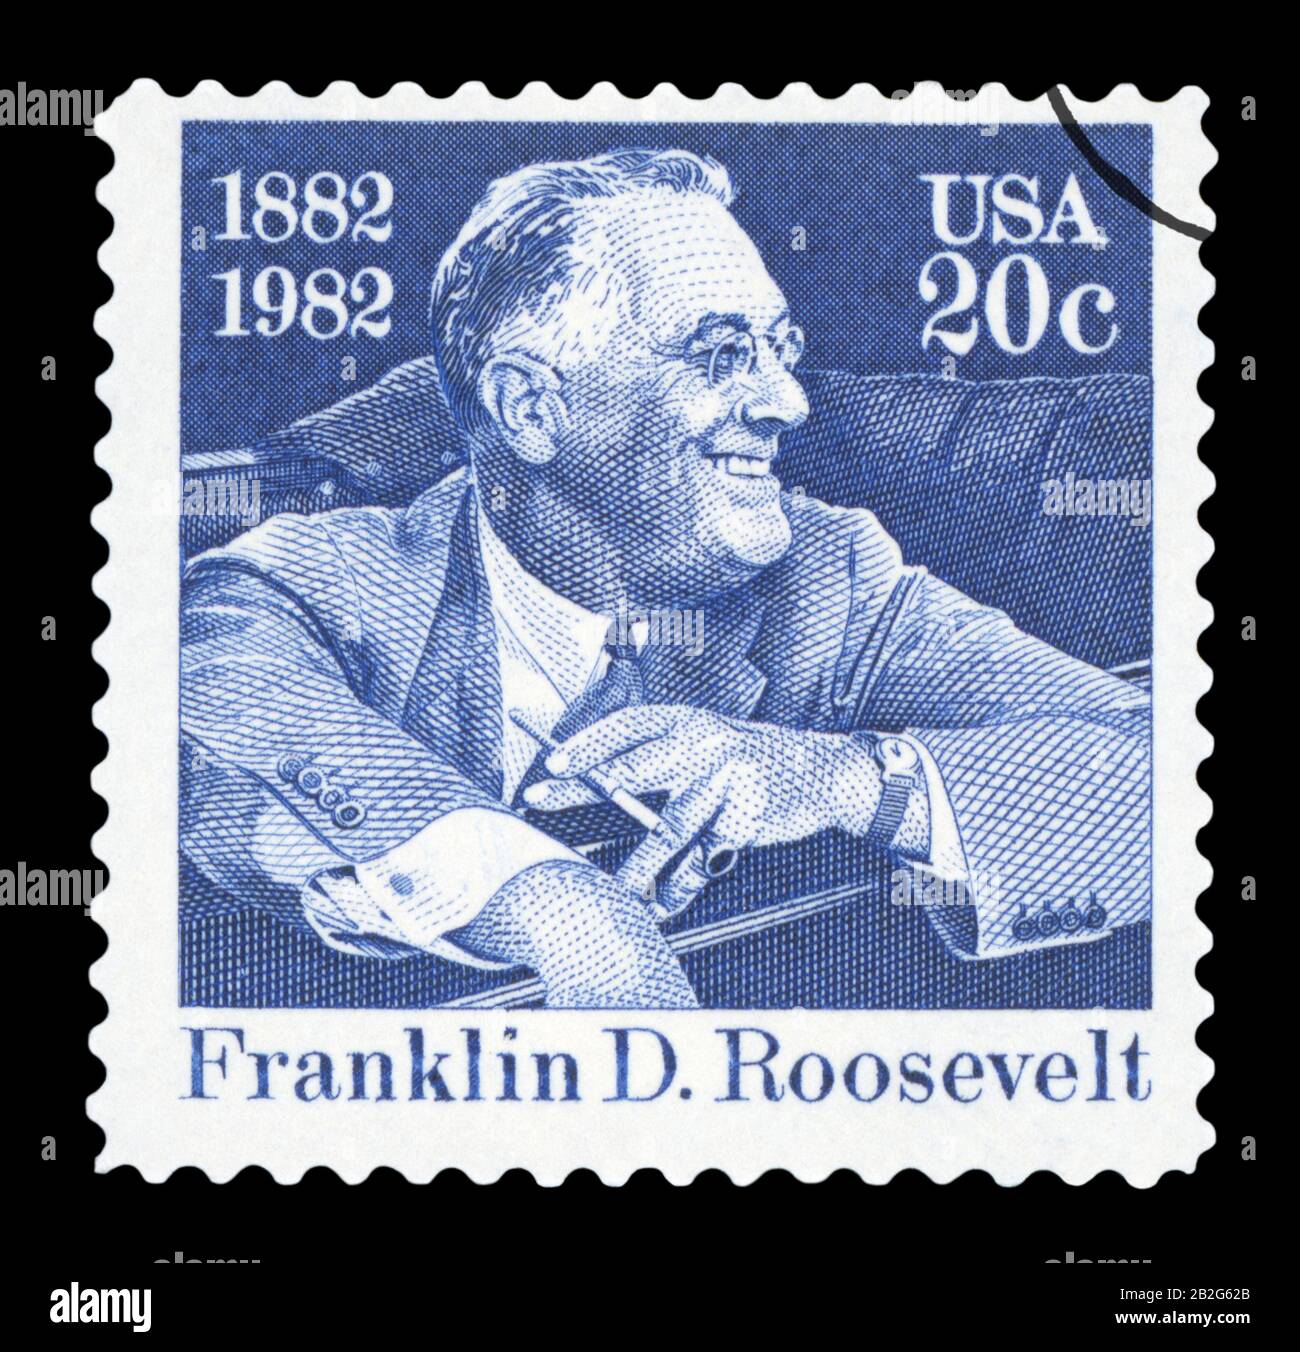 UNITED STATES OF AMERICA - CIRCA 1982: a postage stamp printed in USA showing an image of president Theodore Roosevelt, circa 1982. Stock Photo